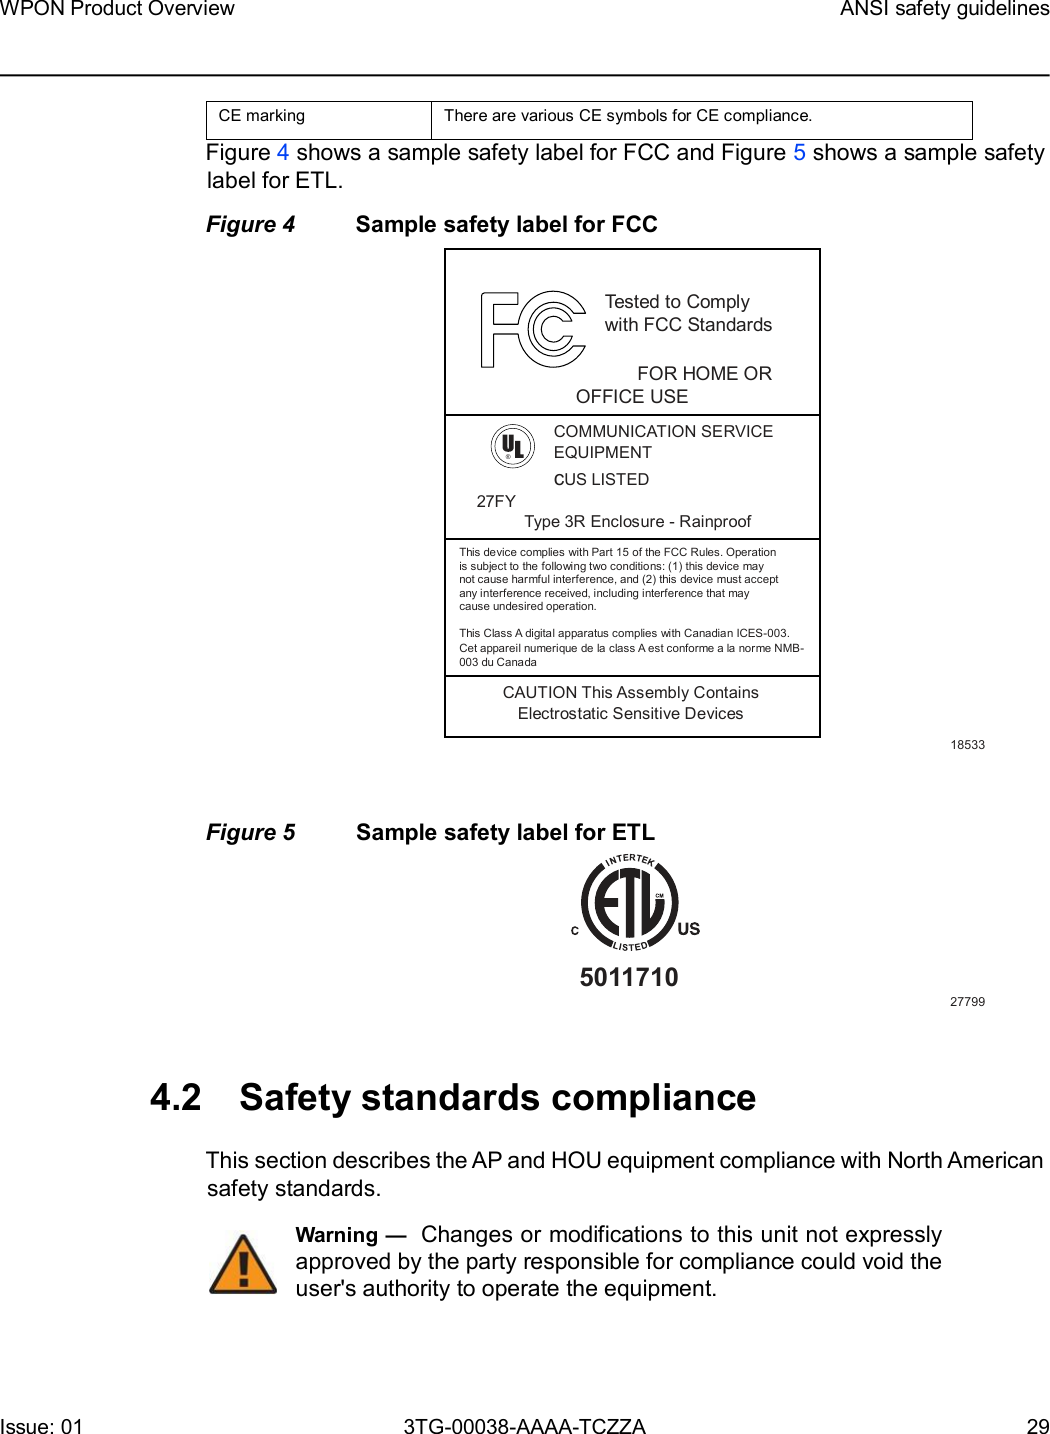 Page 29 of Nokia Bell 7577WPONAPDC WPON User Manual WPON Product Overview